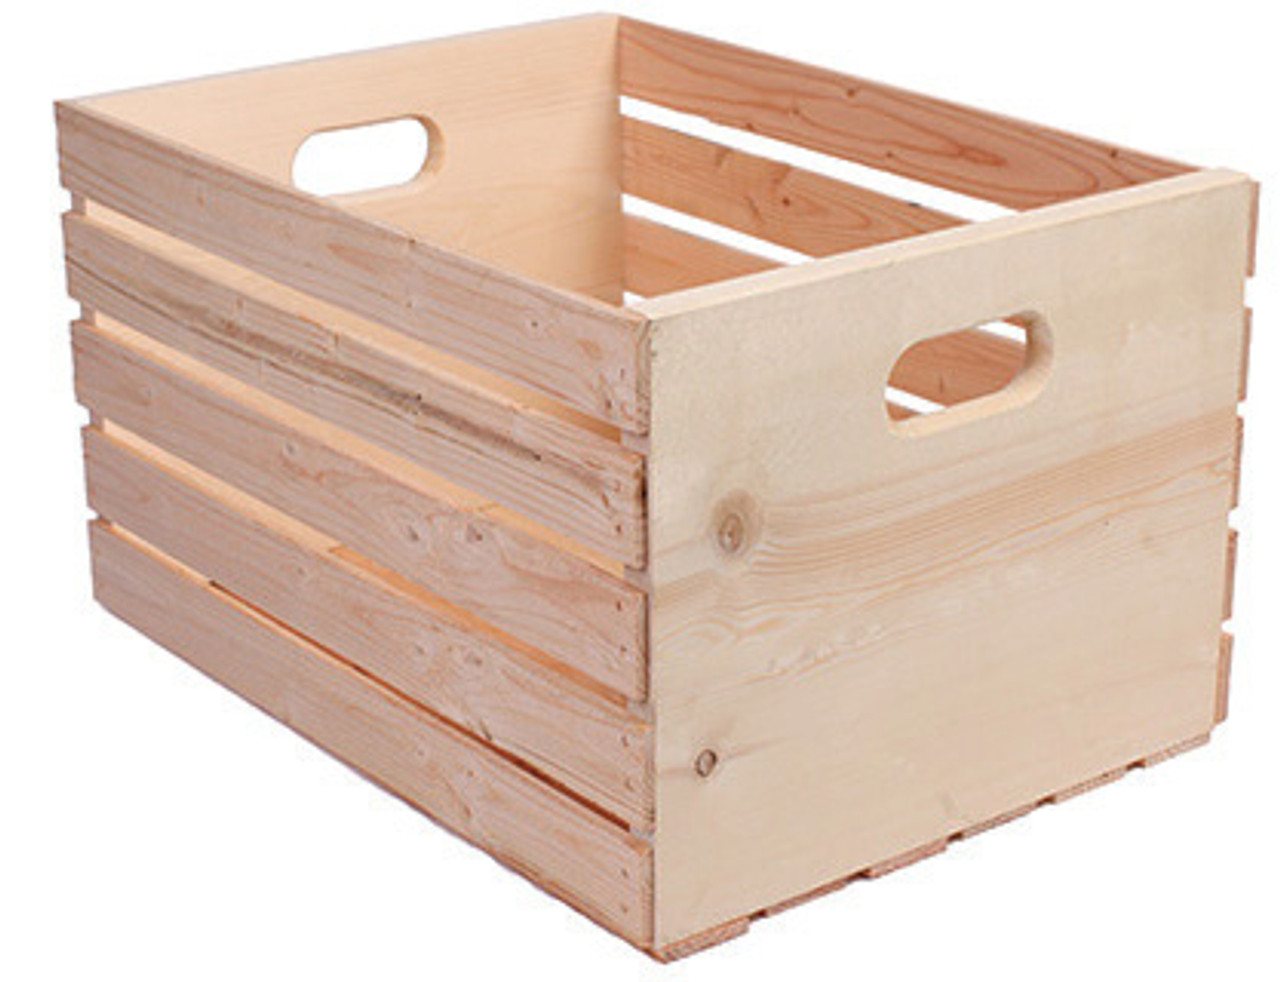 Large Pine Crate 20" x 14" x 11-1/2" - ea.